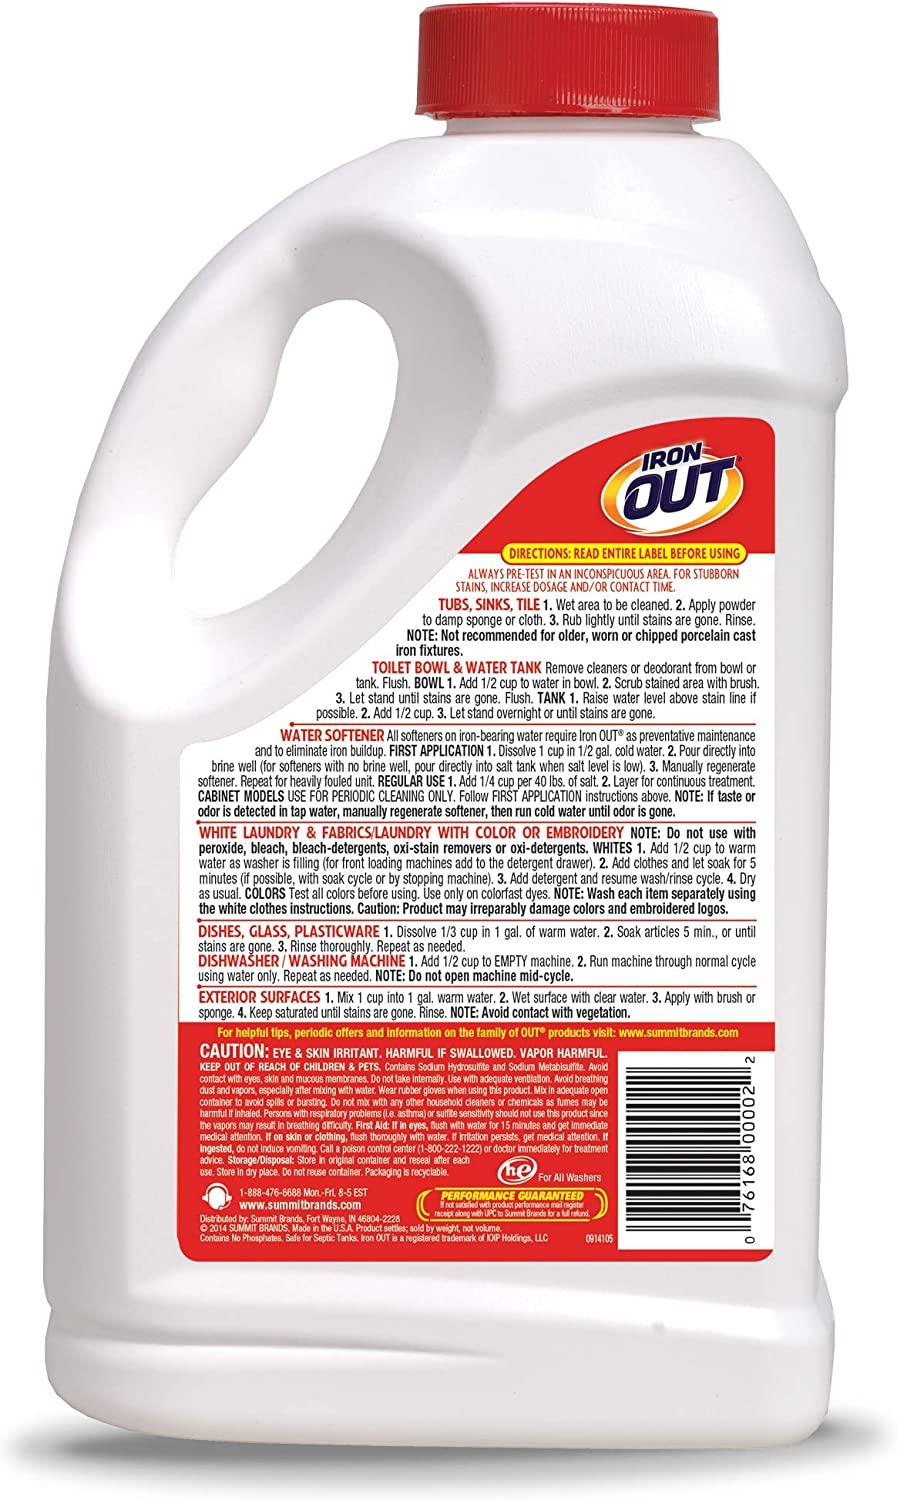 RIT Powder LAUNDRY TREATMENT: Rust Remover, Stain Remover